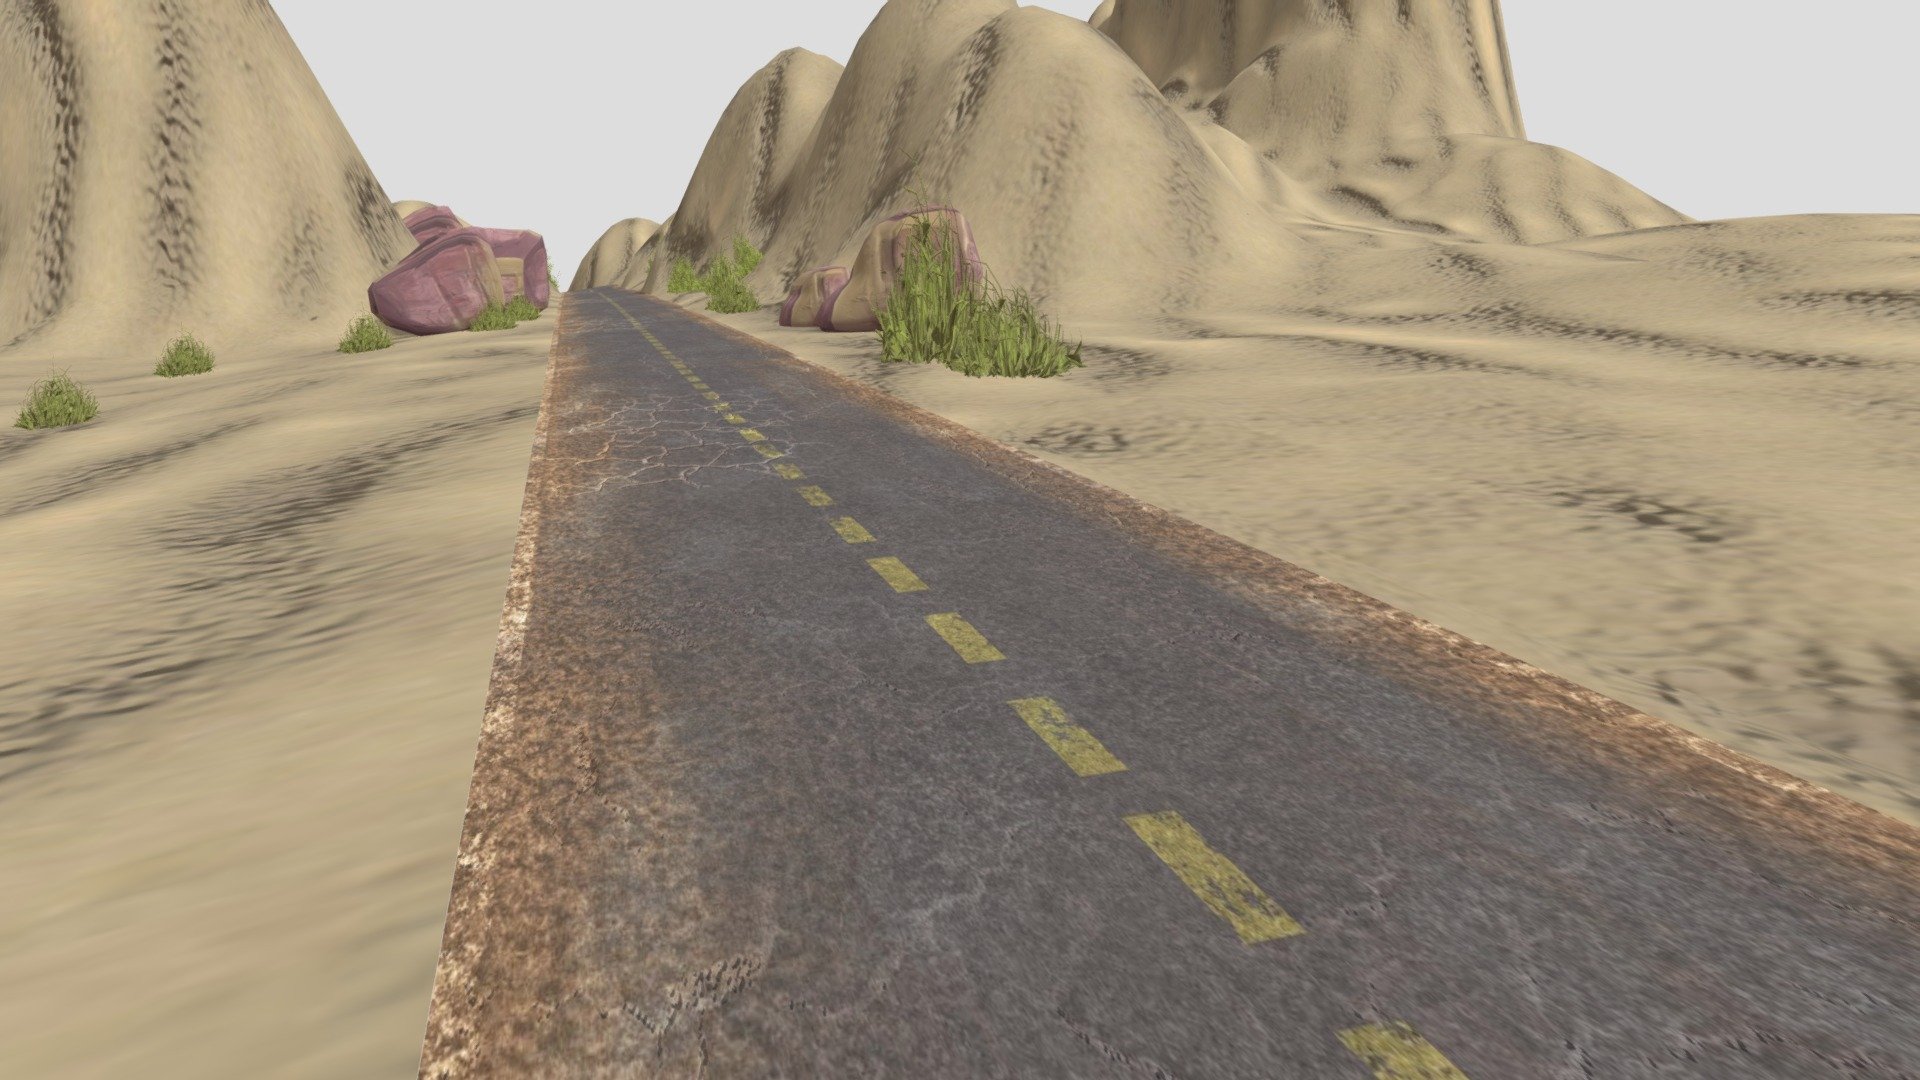 Desert Landscape with Road

Originally created with 3ds Max 2015 render with Vray

Polygons: 206144
Vertices: 379533

Full Uv and Unwrap
Use 5 Texture

Please Visit:
https://nuralam3d.blogspot.com/2022/01/desert-landscape-with-road.html


desert #road #landscape #terrain #highway #street #Arizona #track #motorway #way #car #asphalt #grass #sand #valley #hill - Desert Landscape with Road - 3D model by nuralam018 3d model